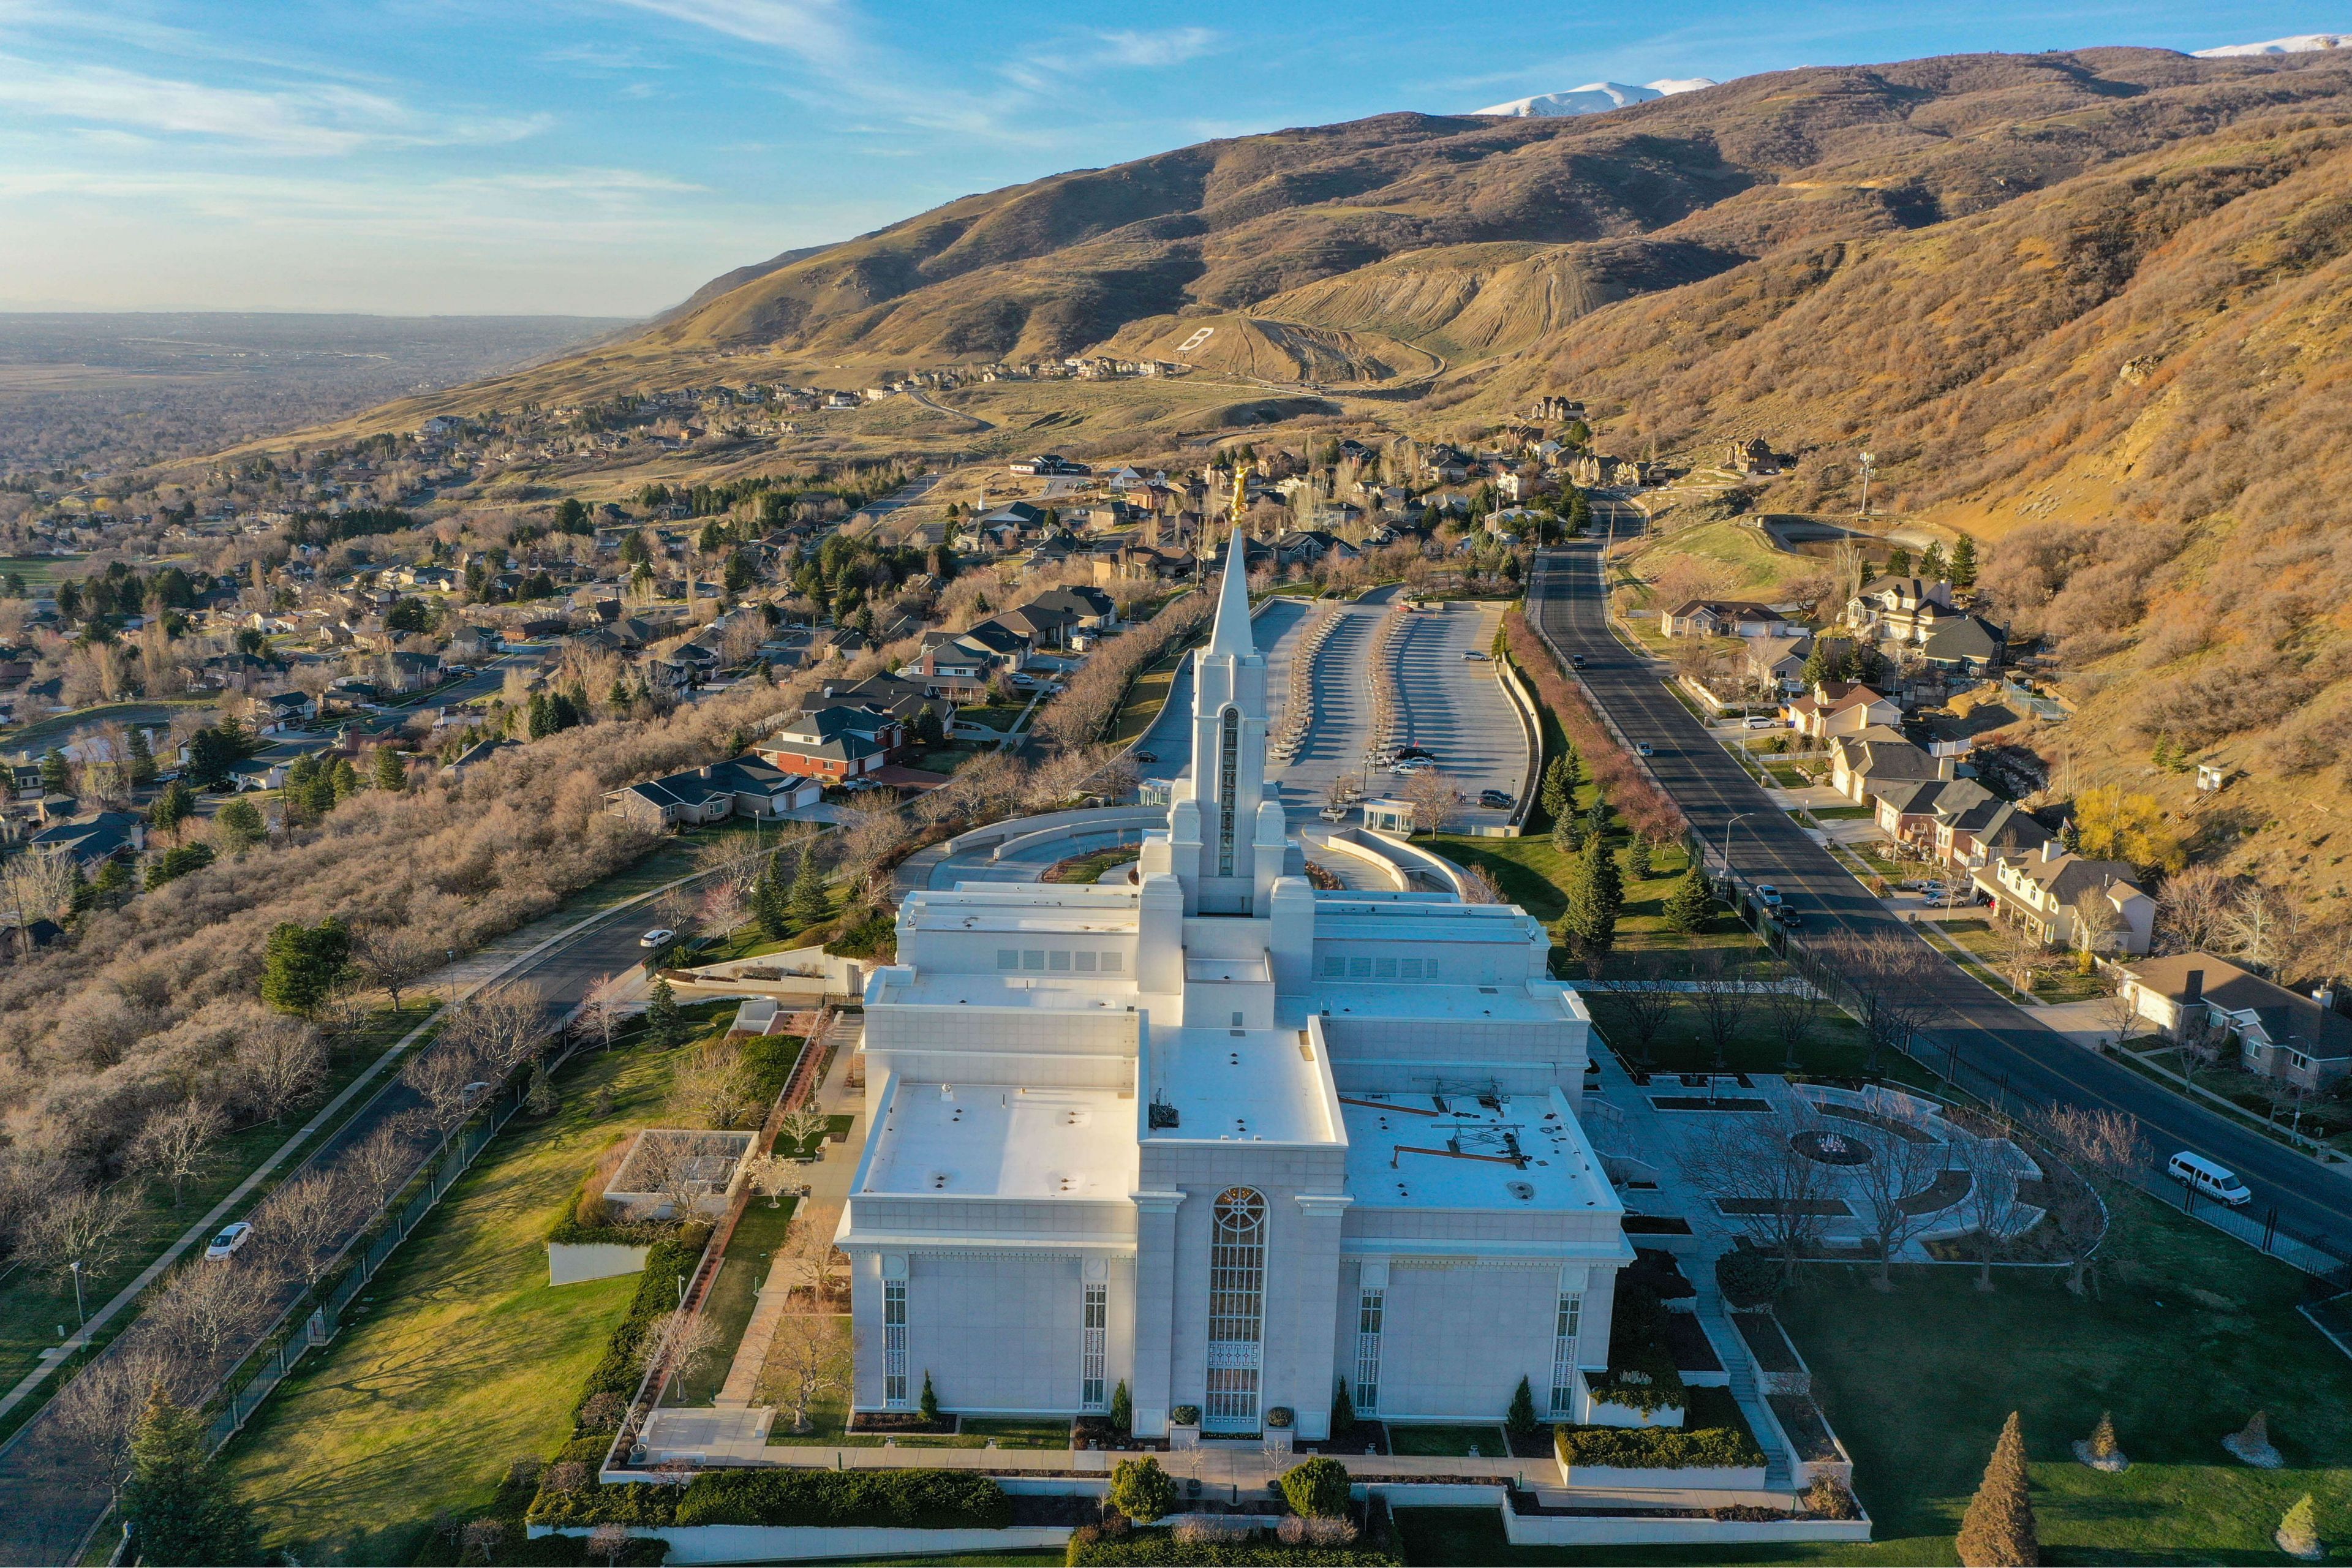 Aerial view of Bountiful Temple with a white membrane Sarnafil Roof. Mountains and residential houses can be seen in the background. 